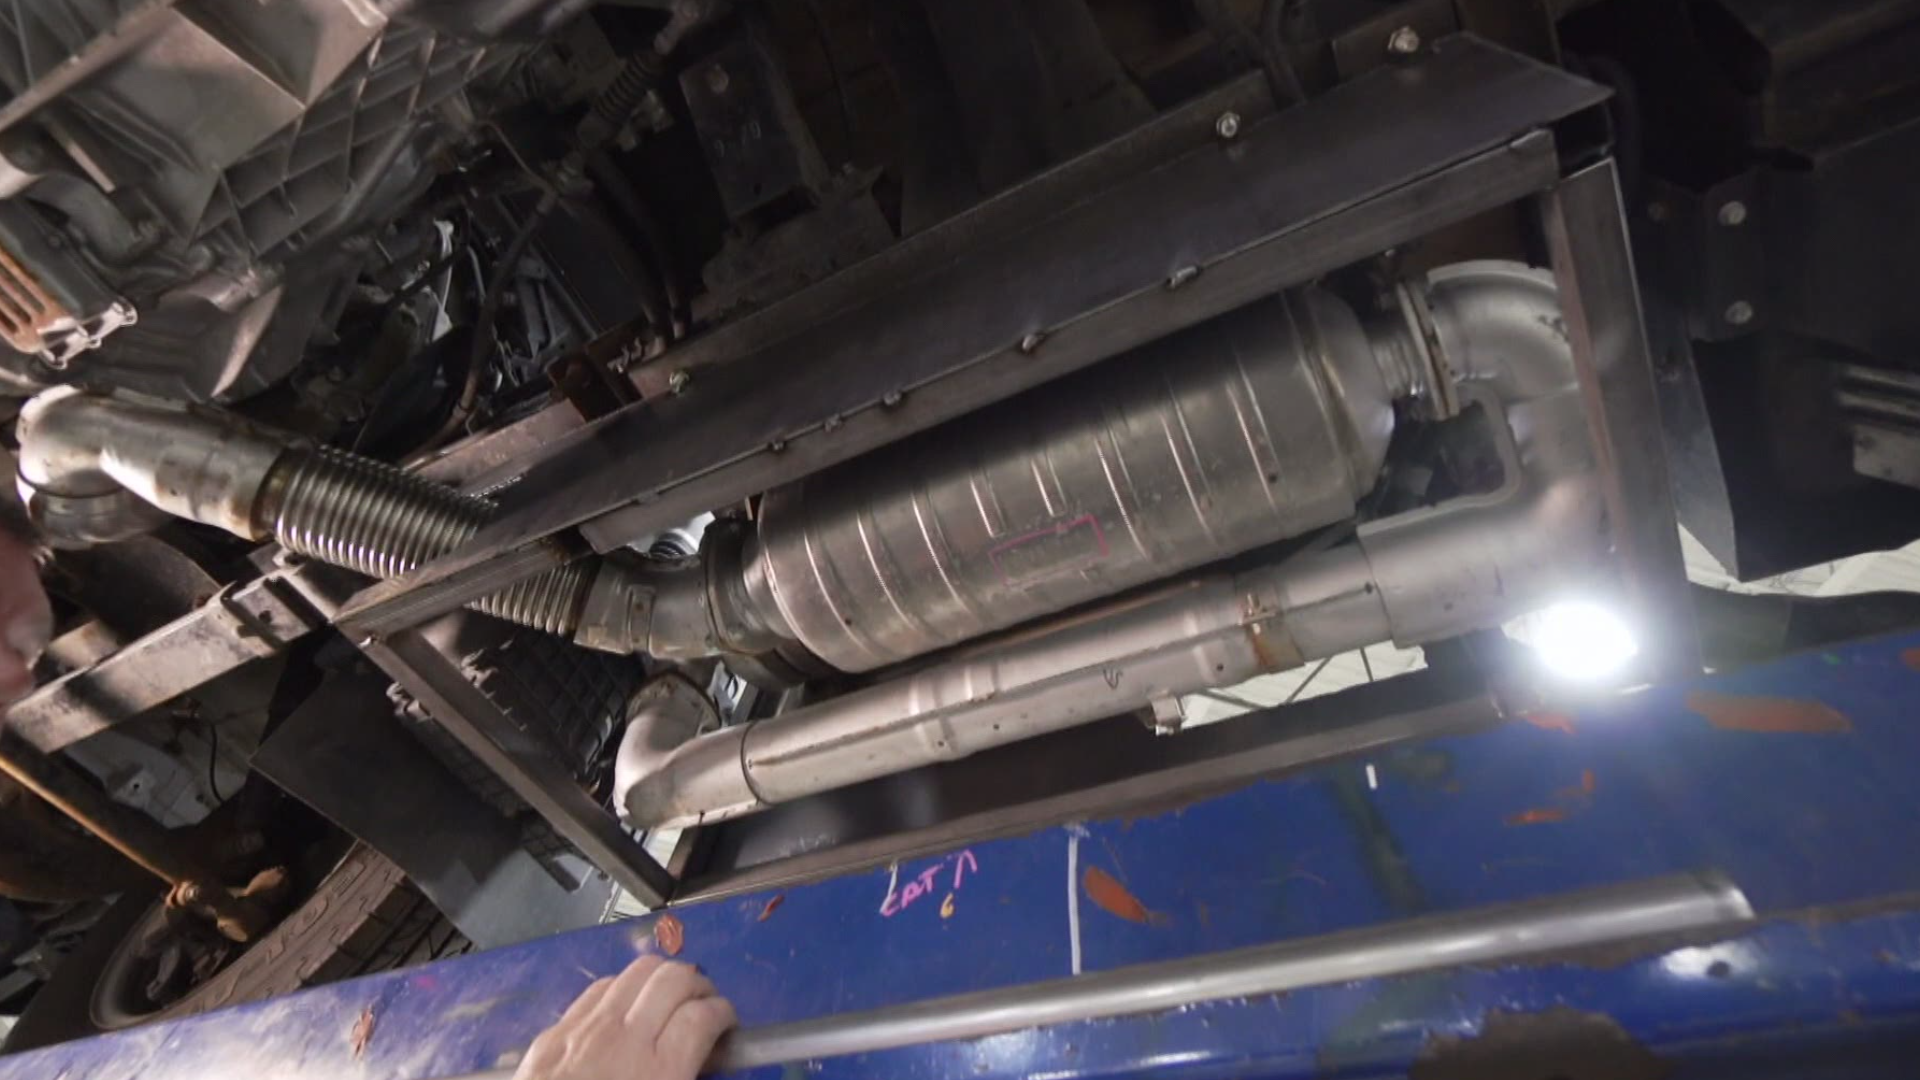 A lot of thieves are focused on part of your car made with metals worth more than gold. 13 Investigates looks into a new way to keep your catalytic converter safe.